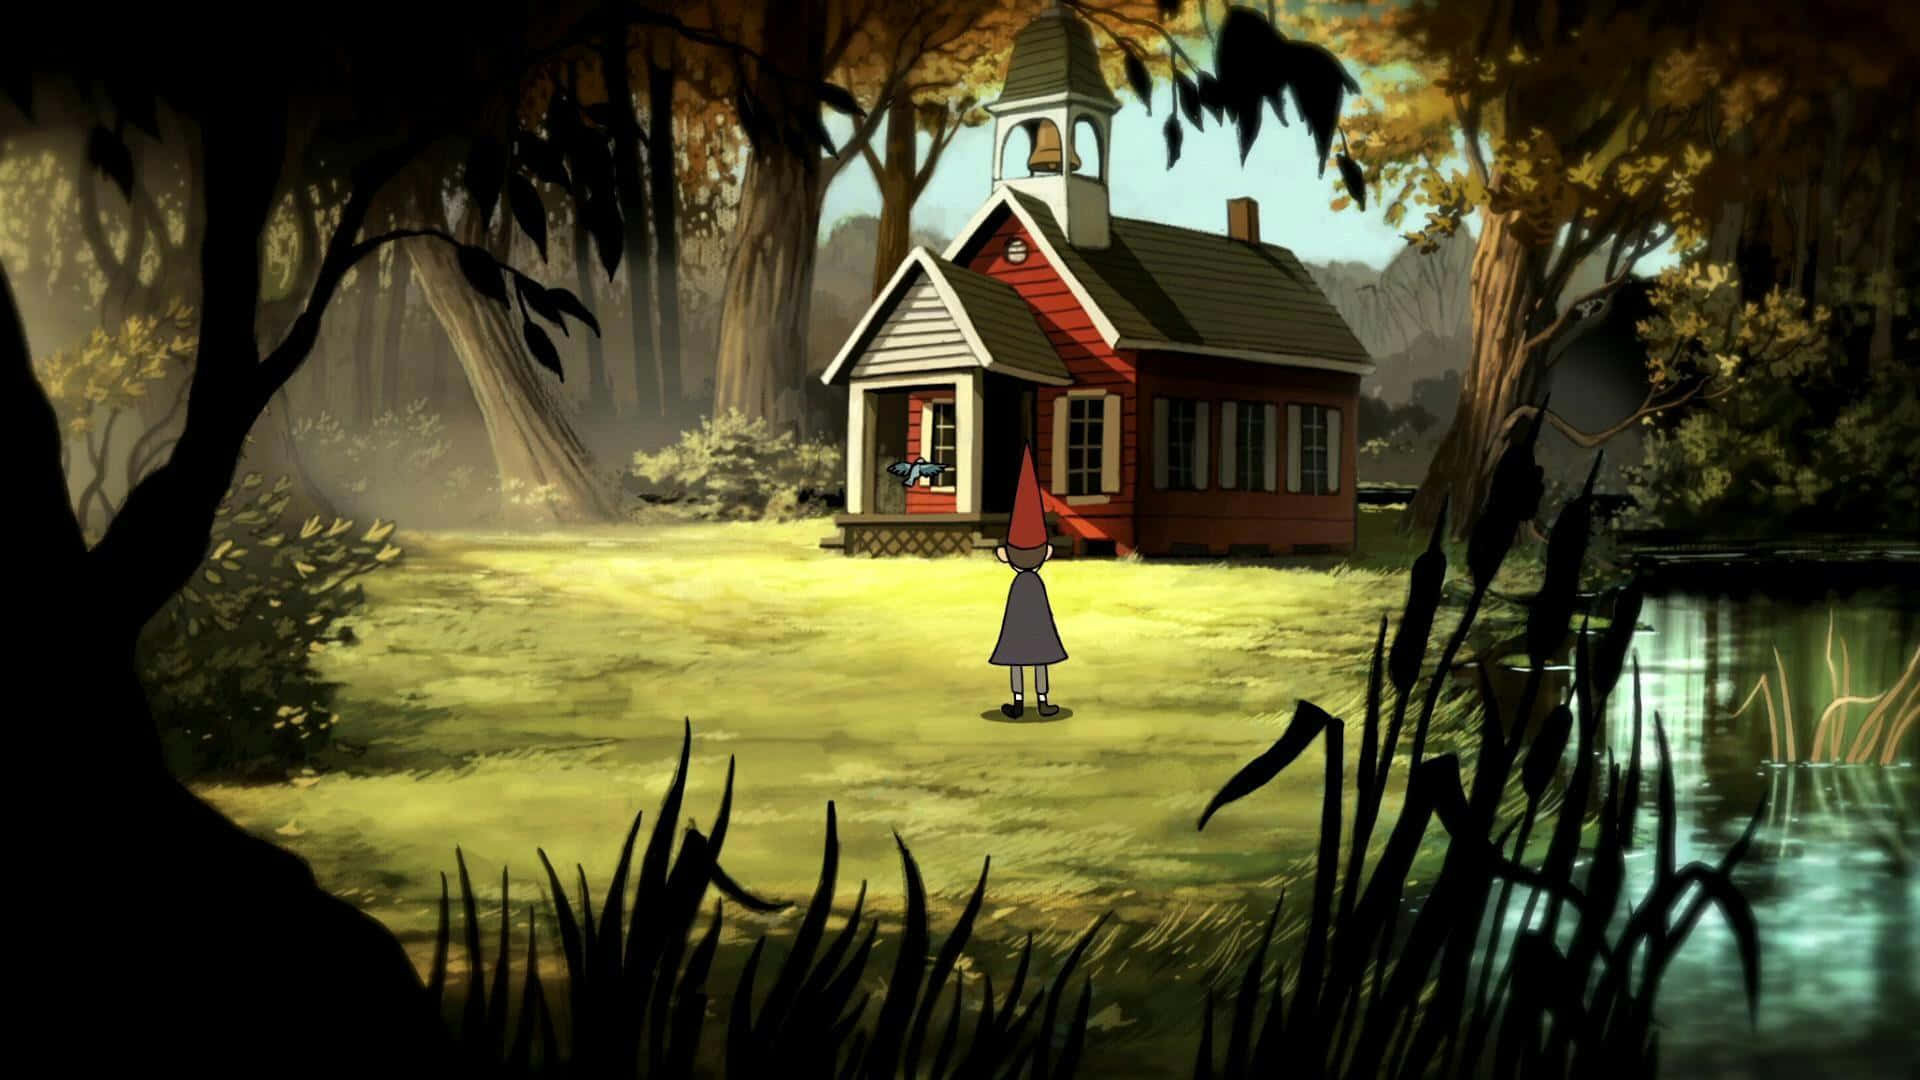 Wirt and Greg traverse a mysterious landscape in the animated miniseries "Over The Garden Wall".